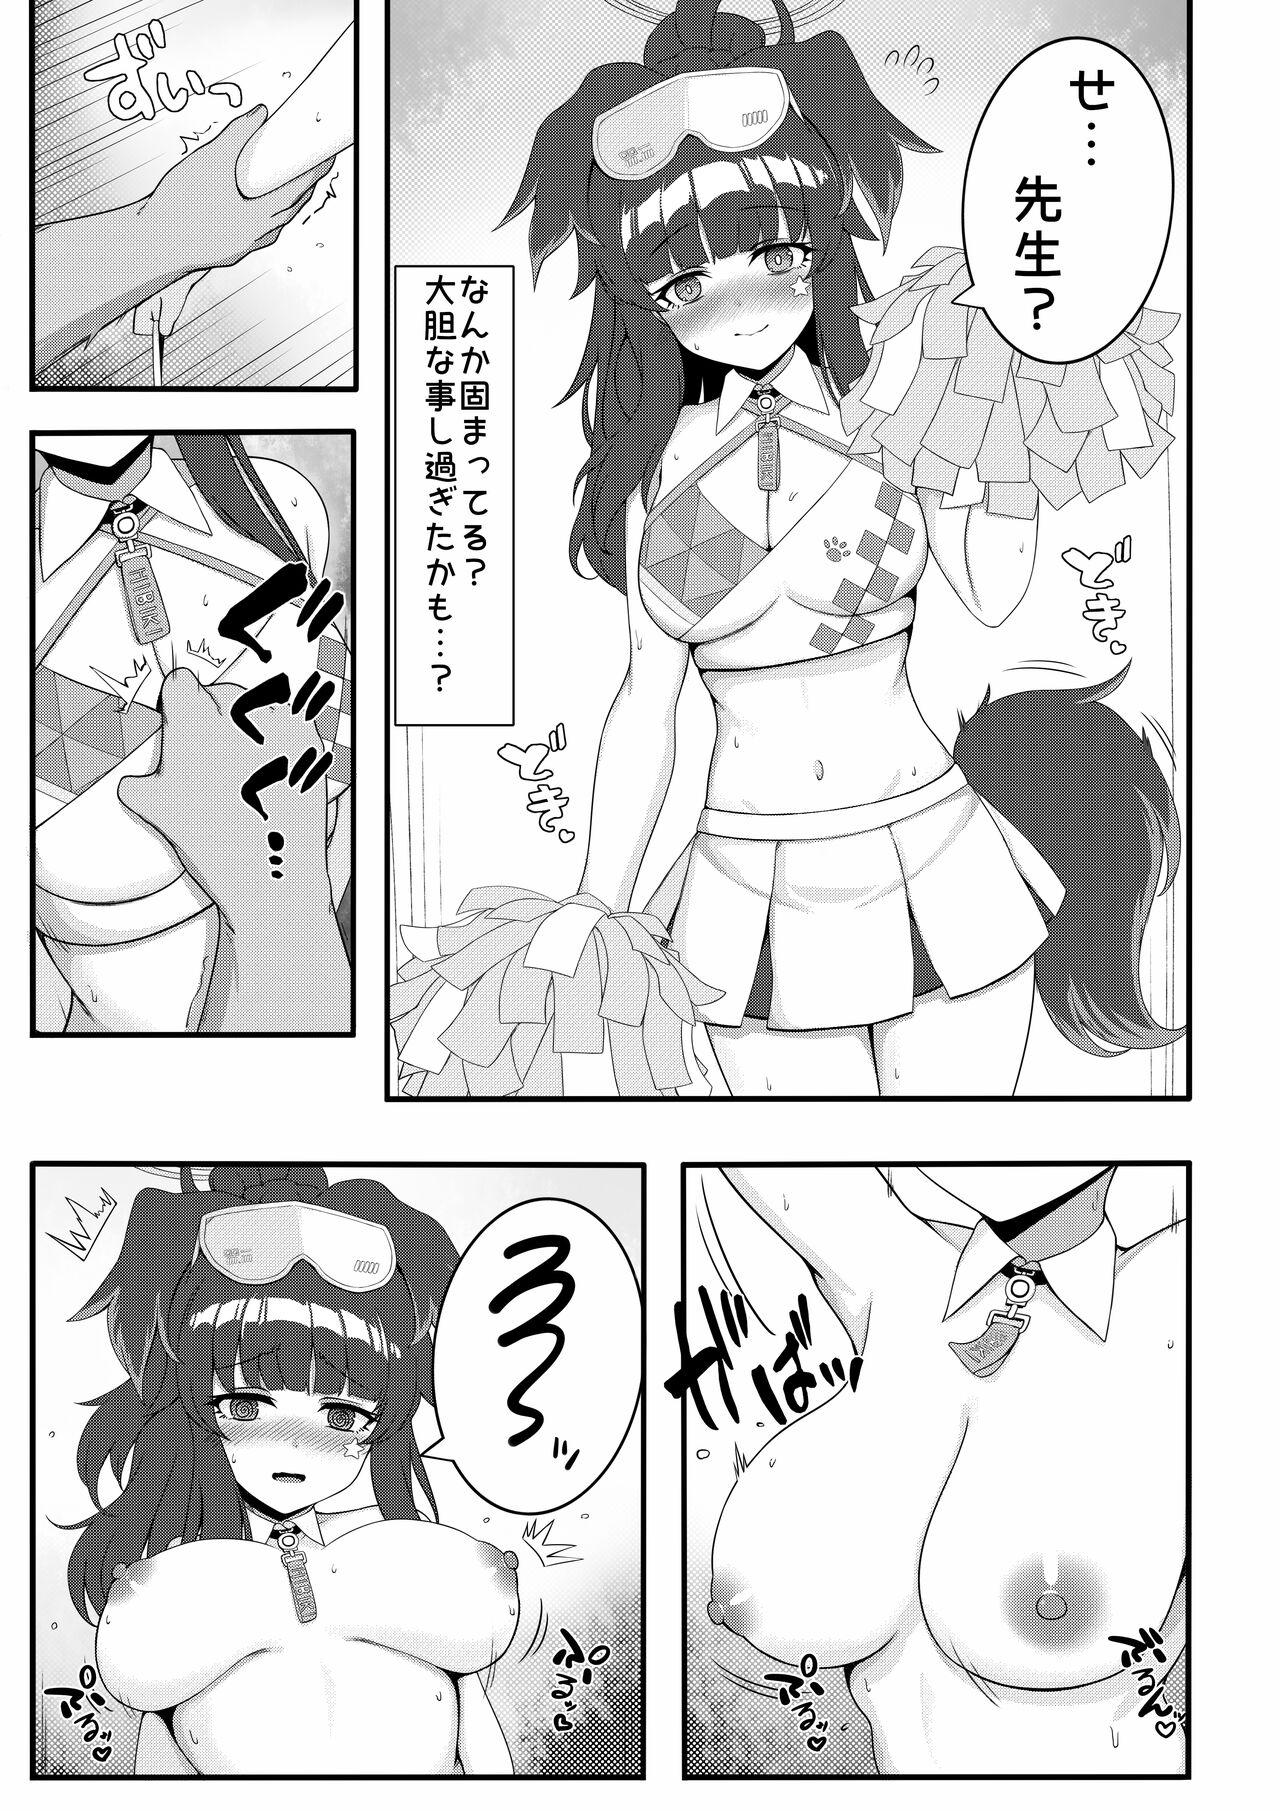 Spain ヒビキちゃん漫画? - Blue archive Hindi - Page 4